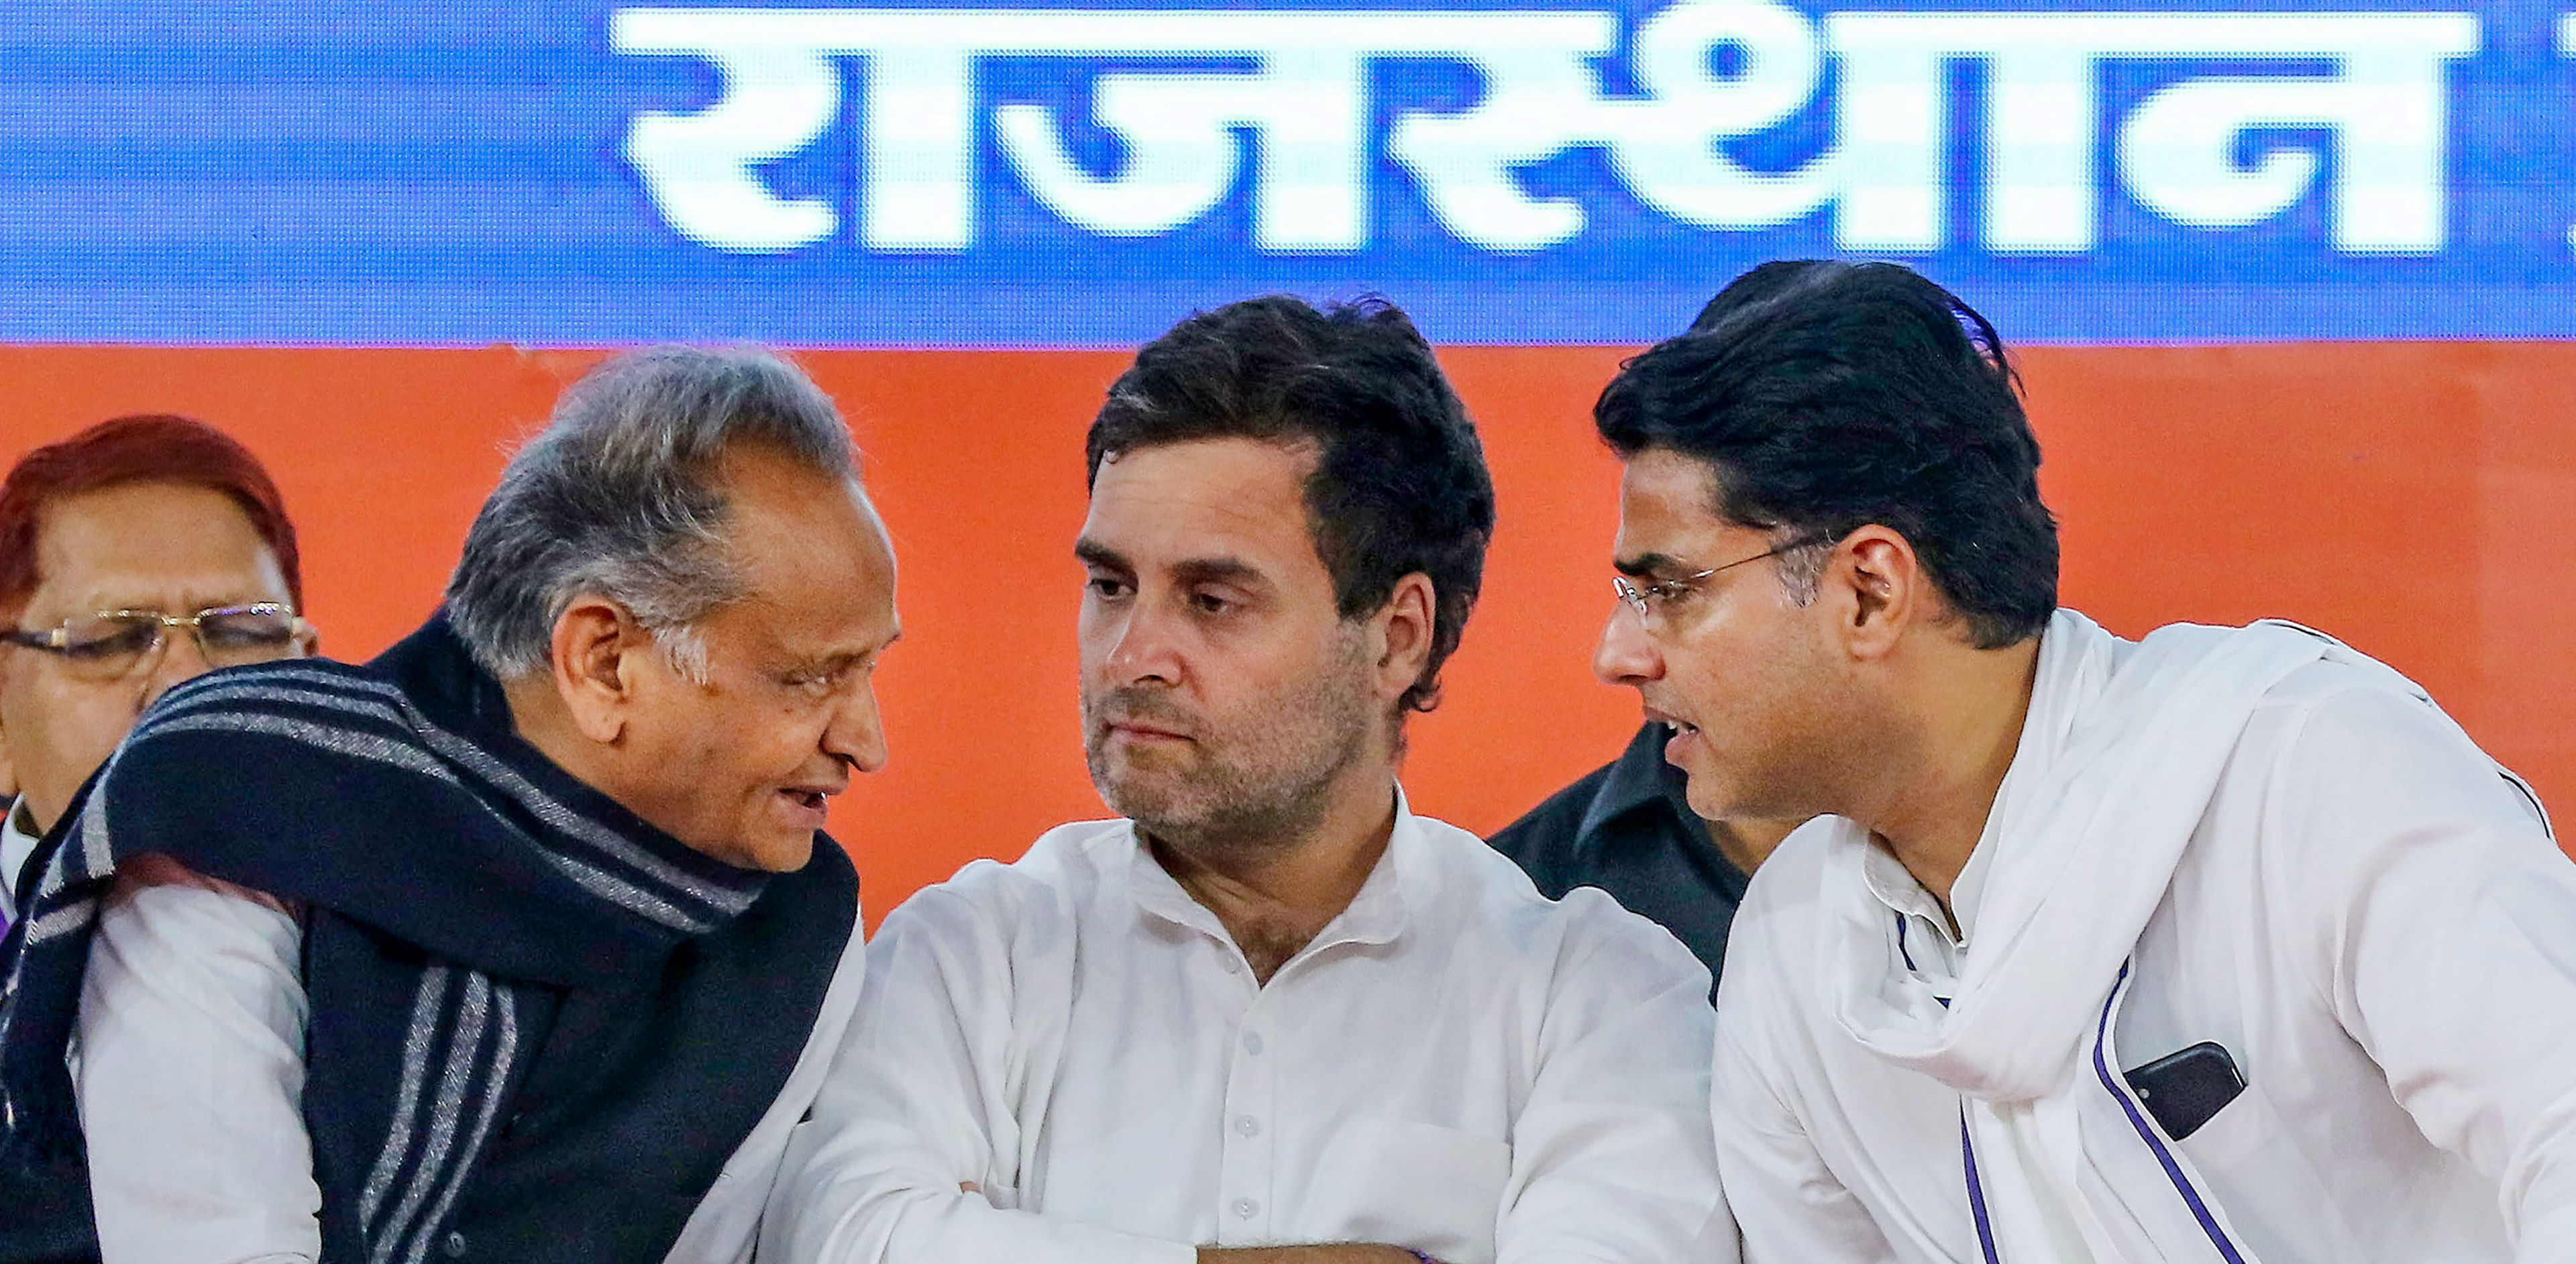 It would take a generous dose of optimism to conclude that the troubles are over for the Congress in Rajasthan, or that Sachin Pilot, as some reports say, has accepted Rahul Gandhi as the boss in ending his rebellion. Credit: PTI